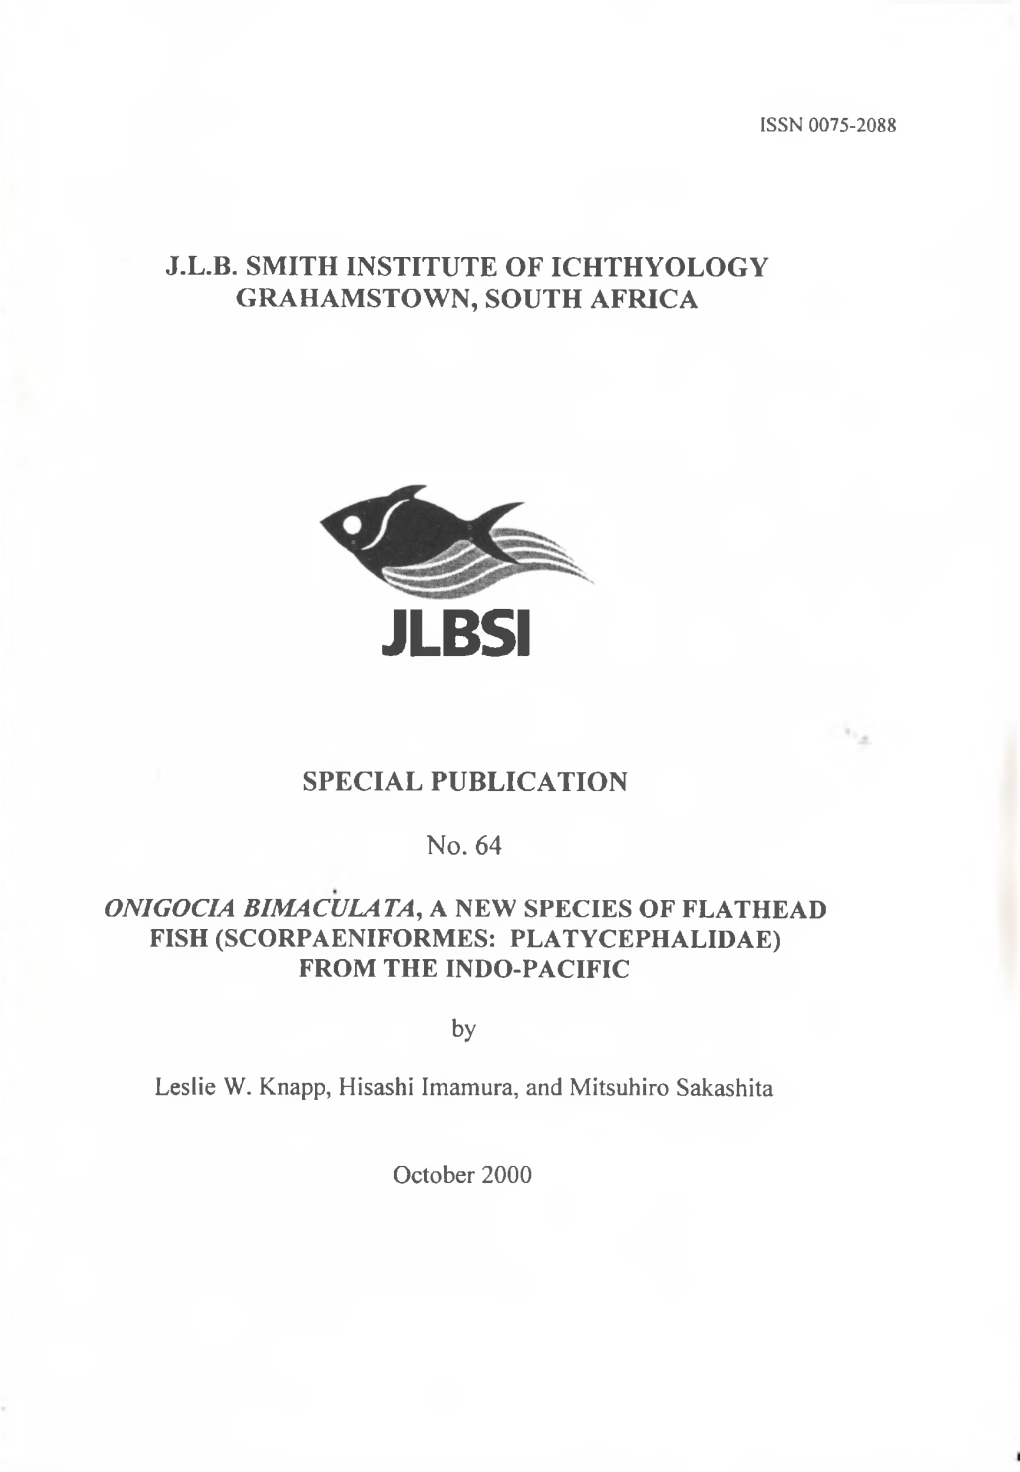 J.L.B. Smith Institute of Ichthyology Grahamstown, South Africa